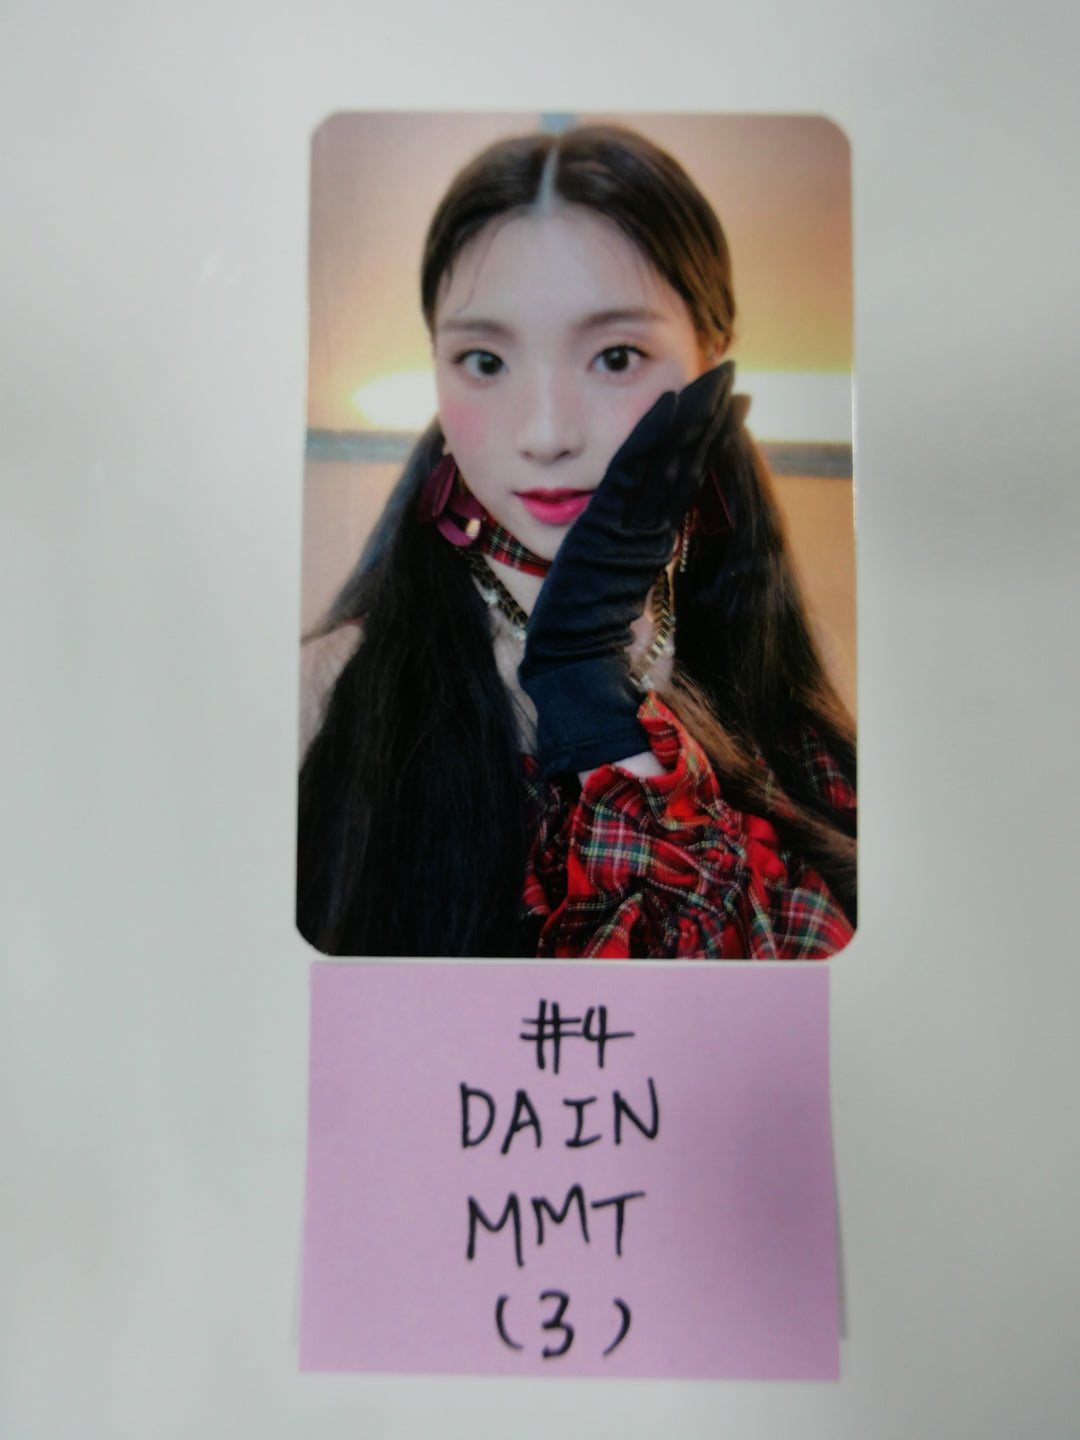 Hot Issue "Issue Maker" - Mmt Pre-order Photocard